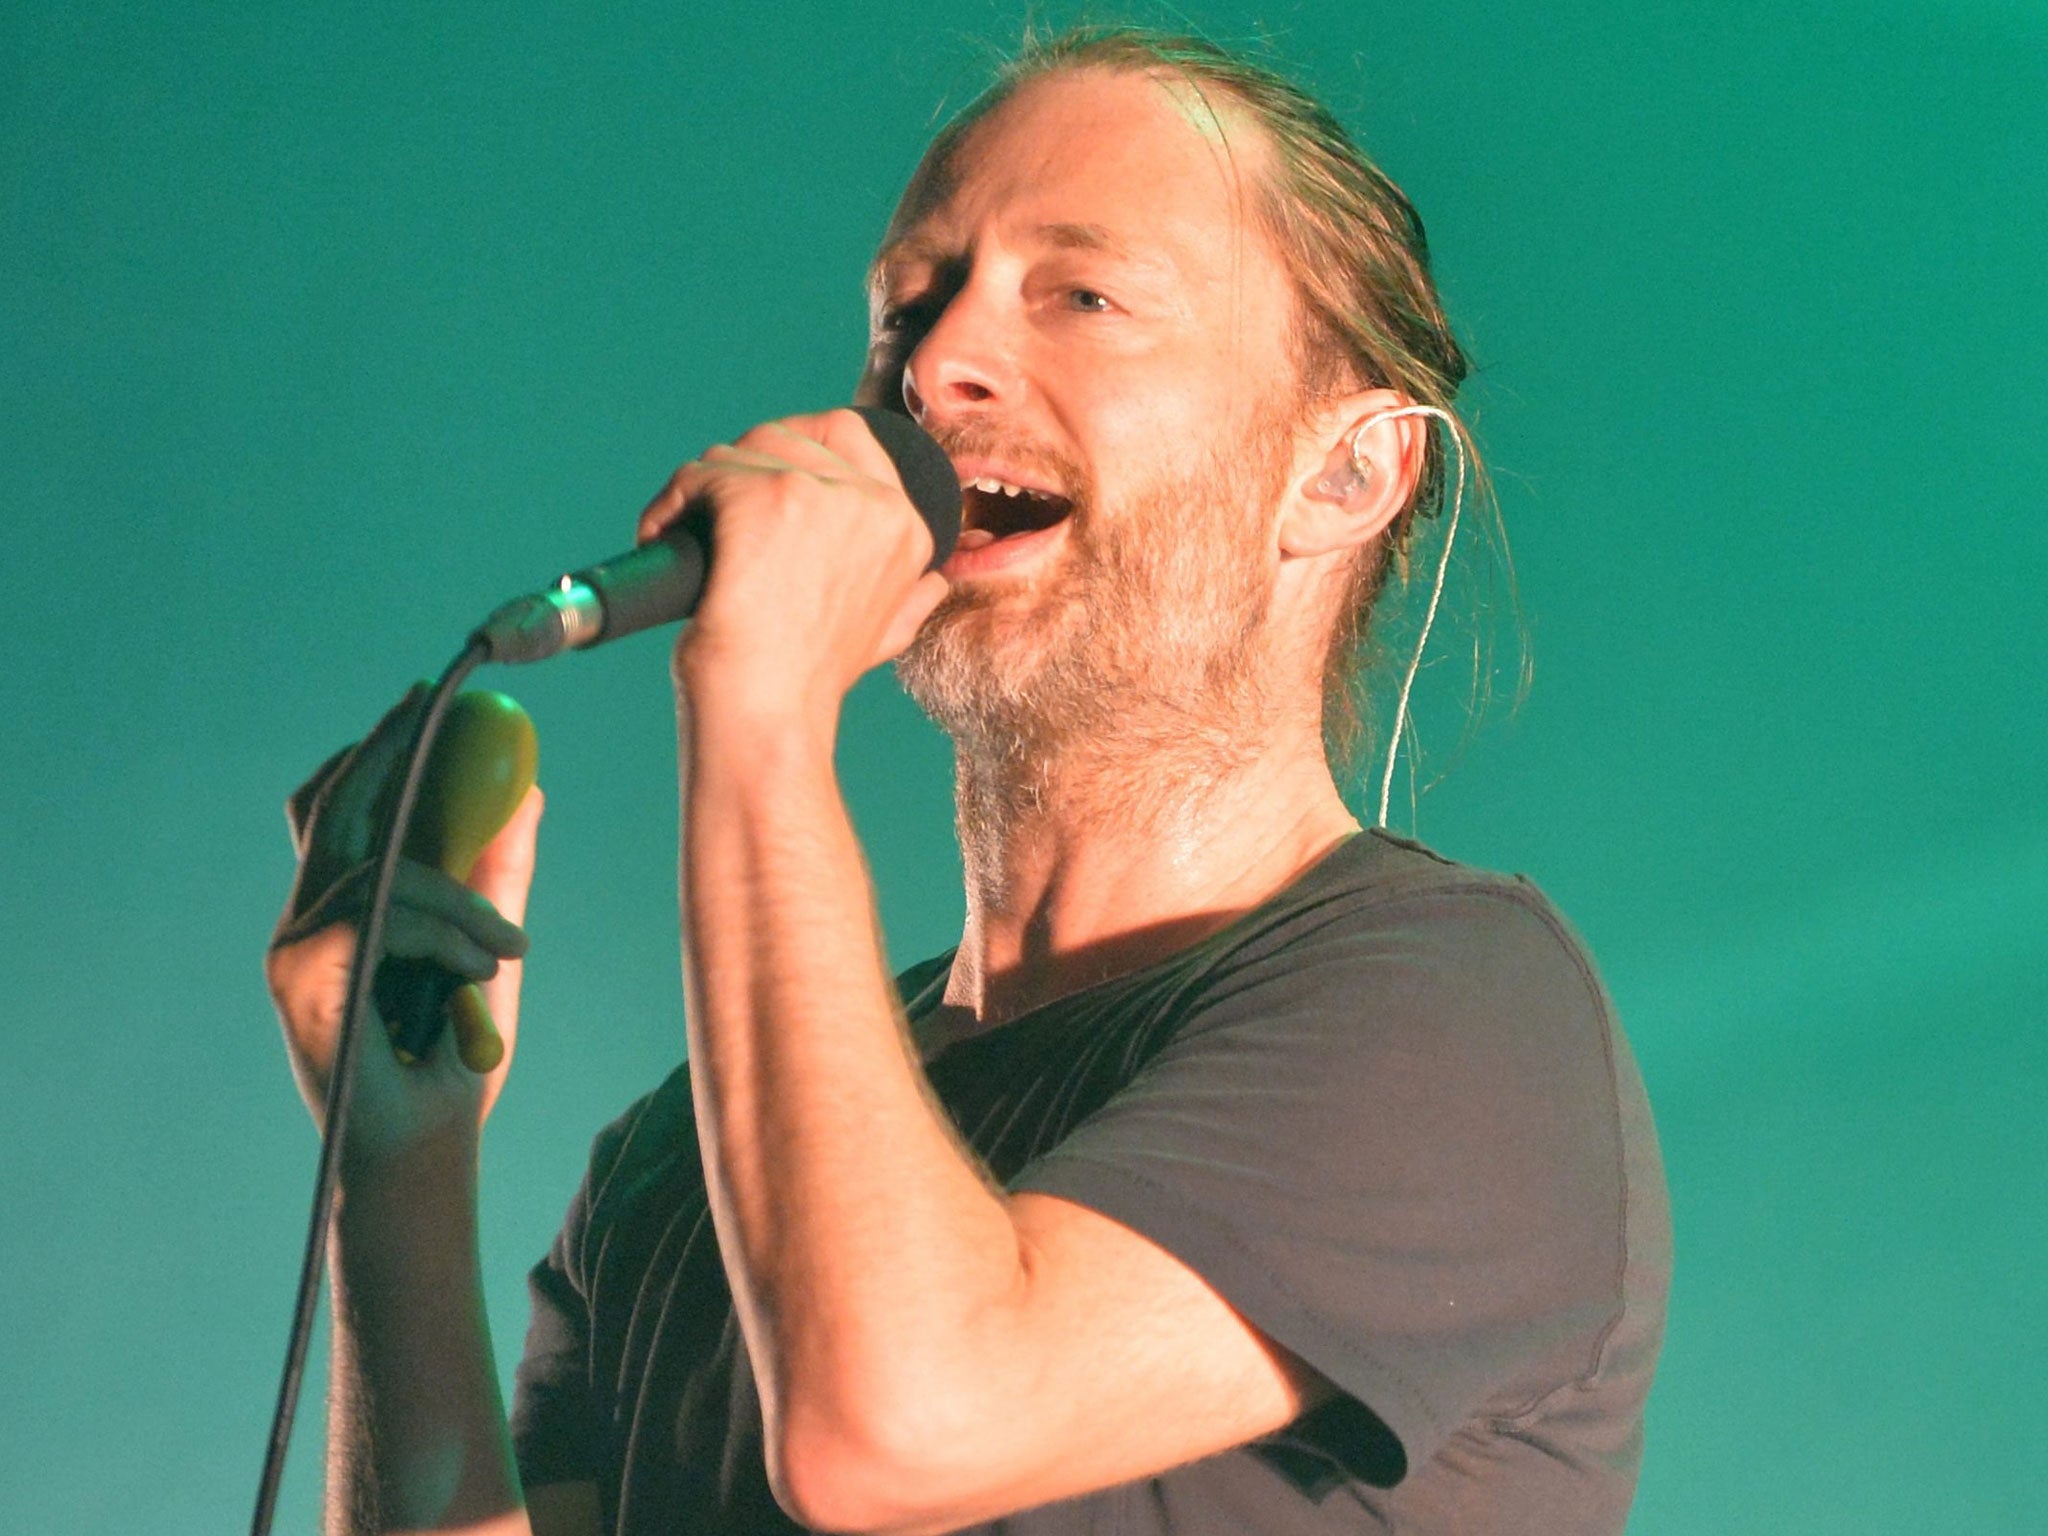 Beach boy: Thom Yorke rocks a ‘surfer dude’ look, to front new band Atoms for Peace